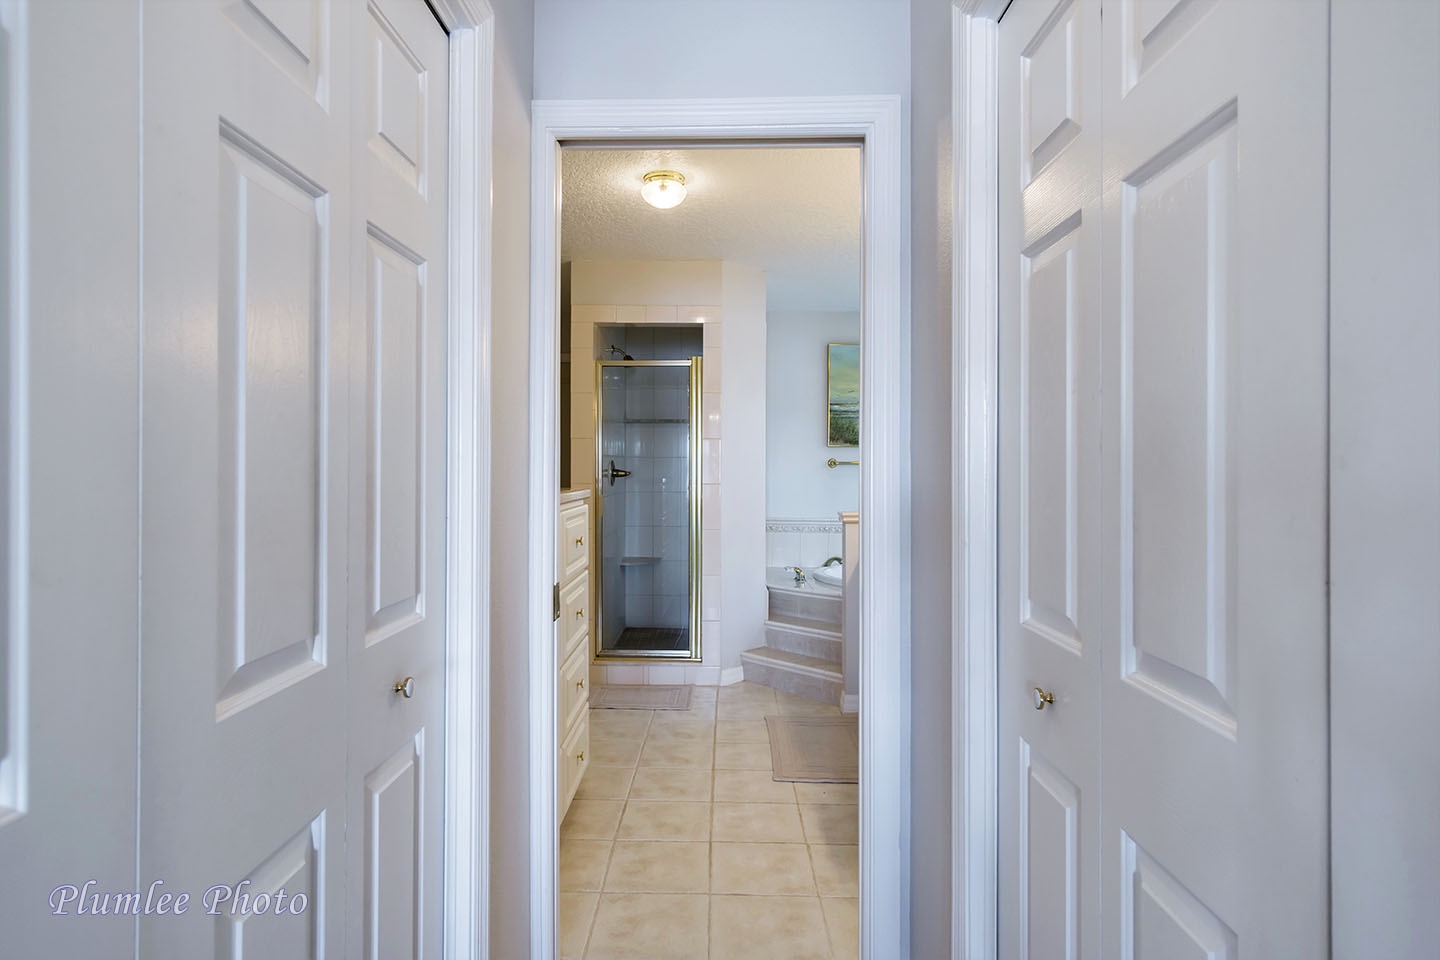 Plenty of closet space for the master bedroom along the way to the ensuite master bathroom.